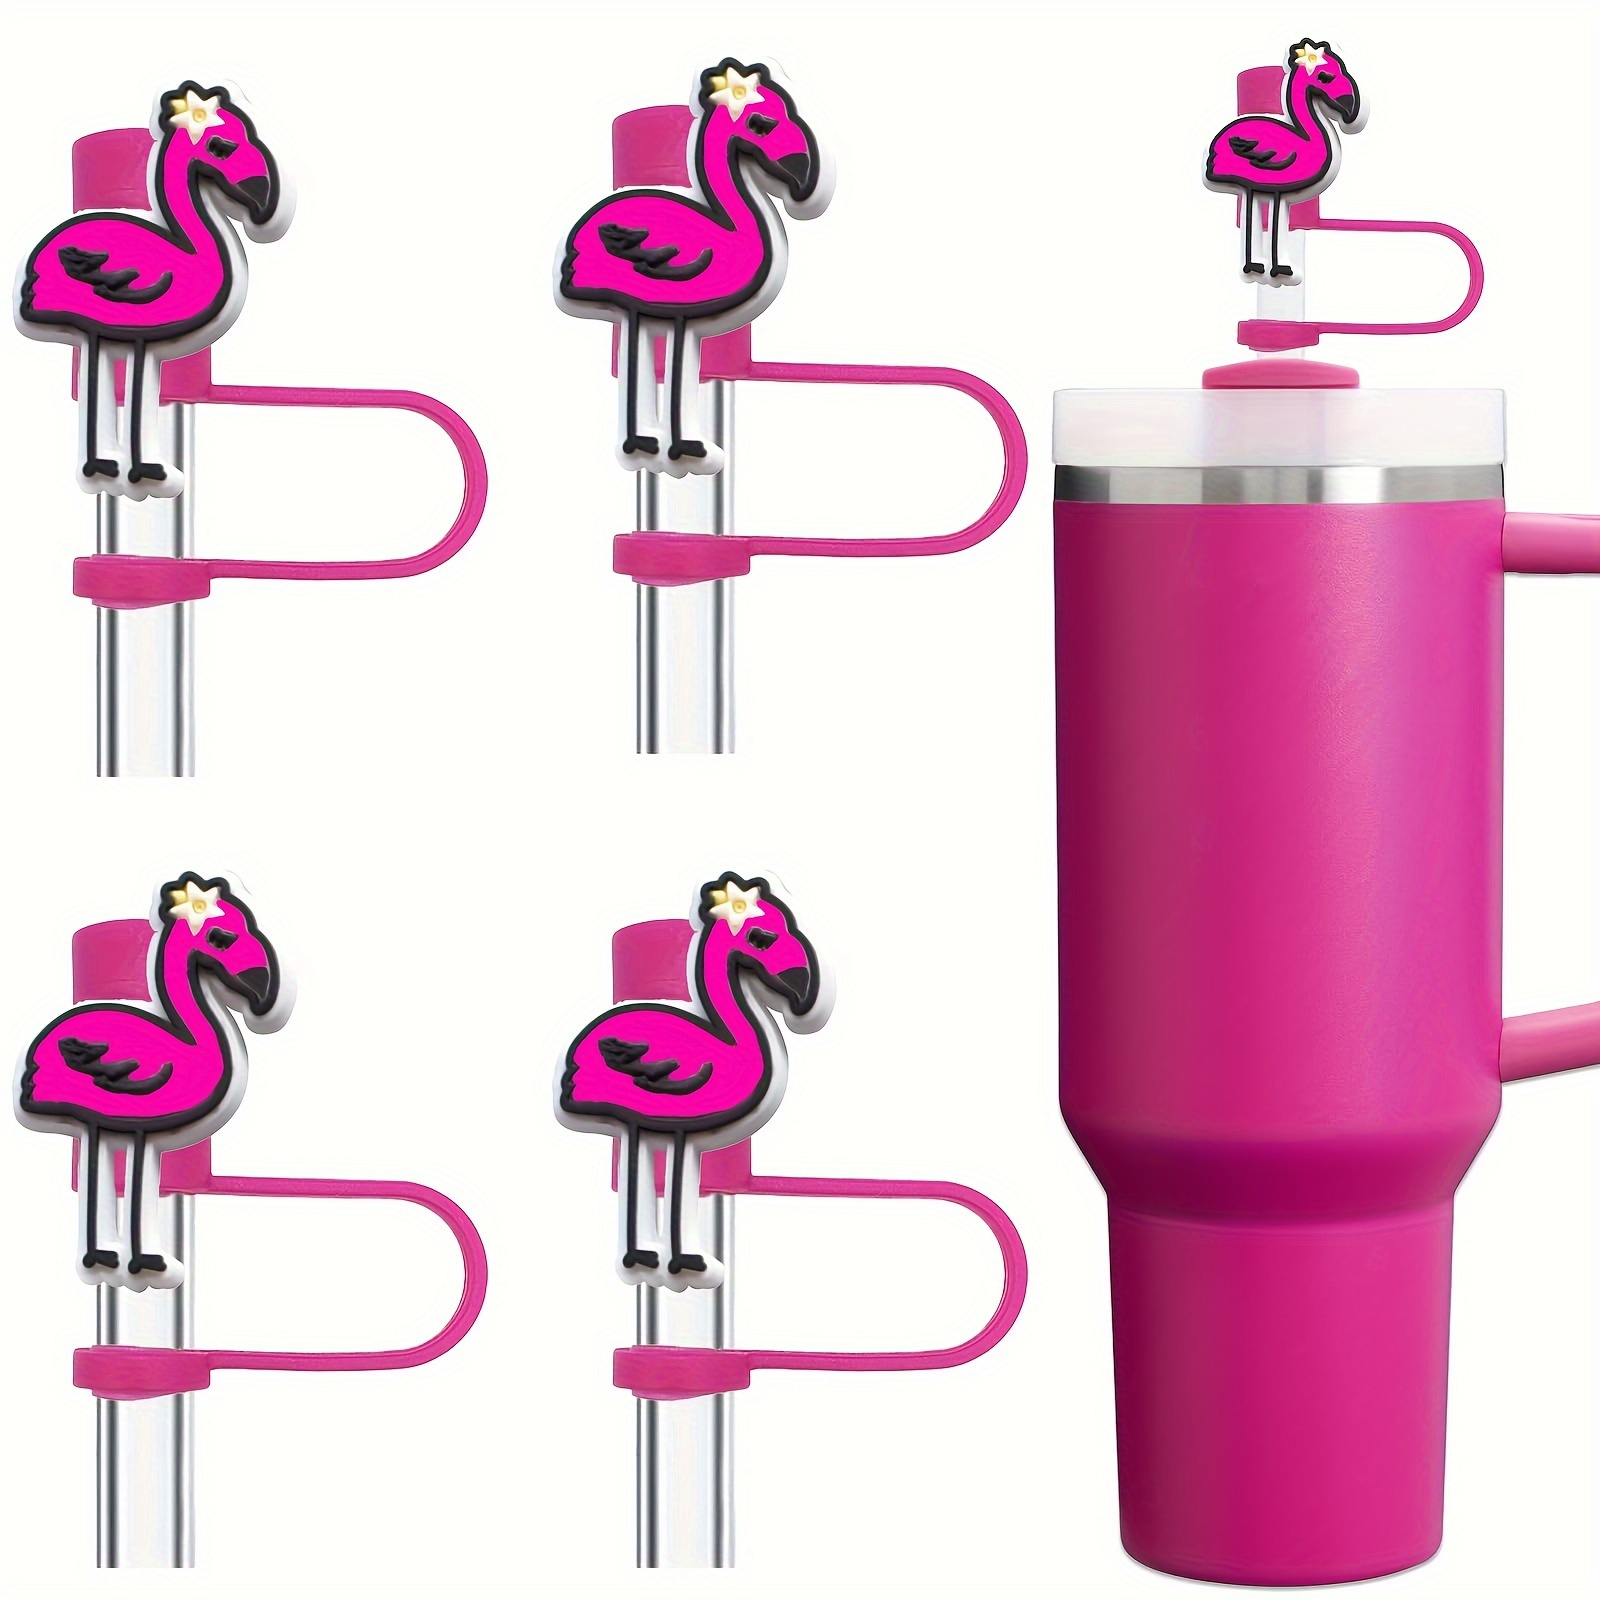 

Festive Flamingo Straw Cover: Silicone Protector For 10mm Straws, Perfect For Stanley Cup Tumblers - 4 Pieces, Dustproof, Leakproof